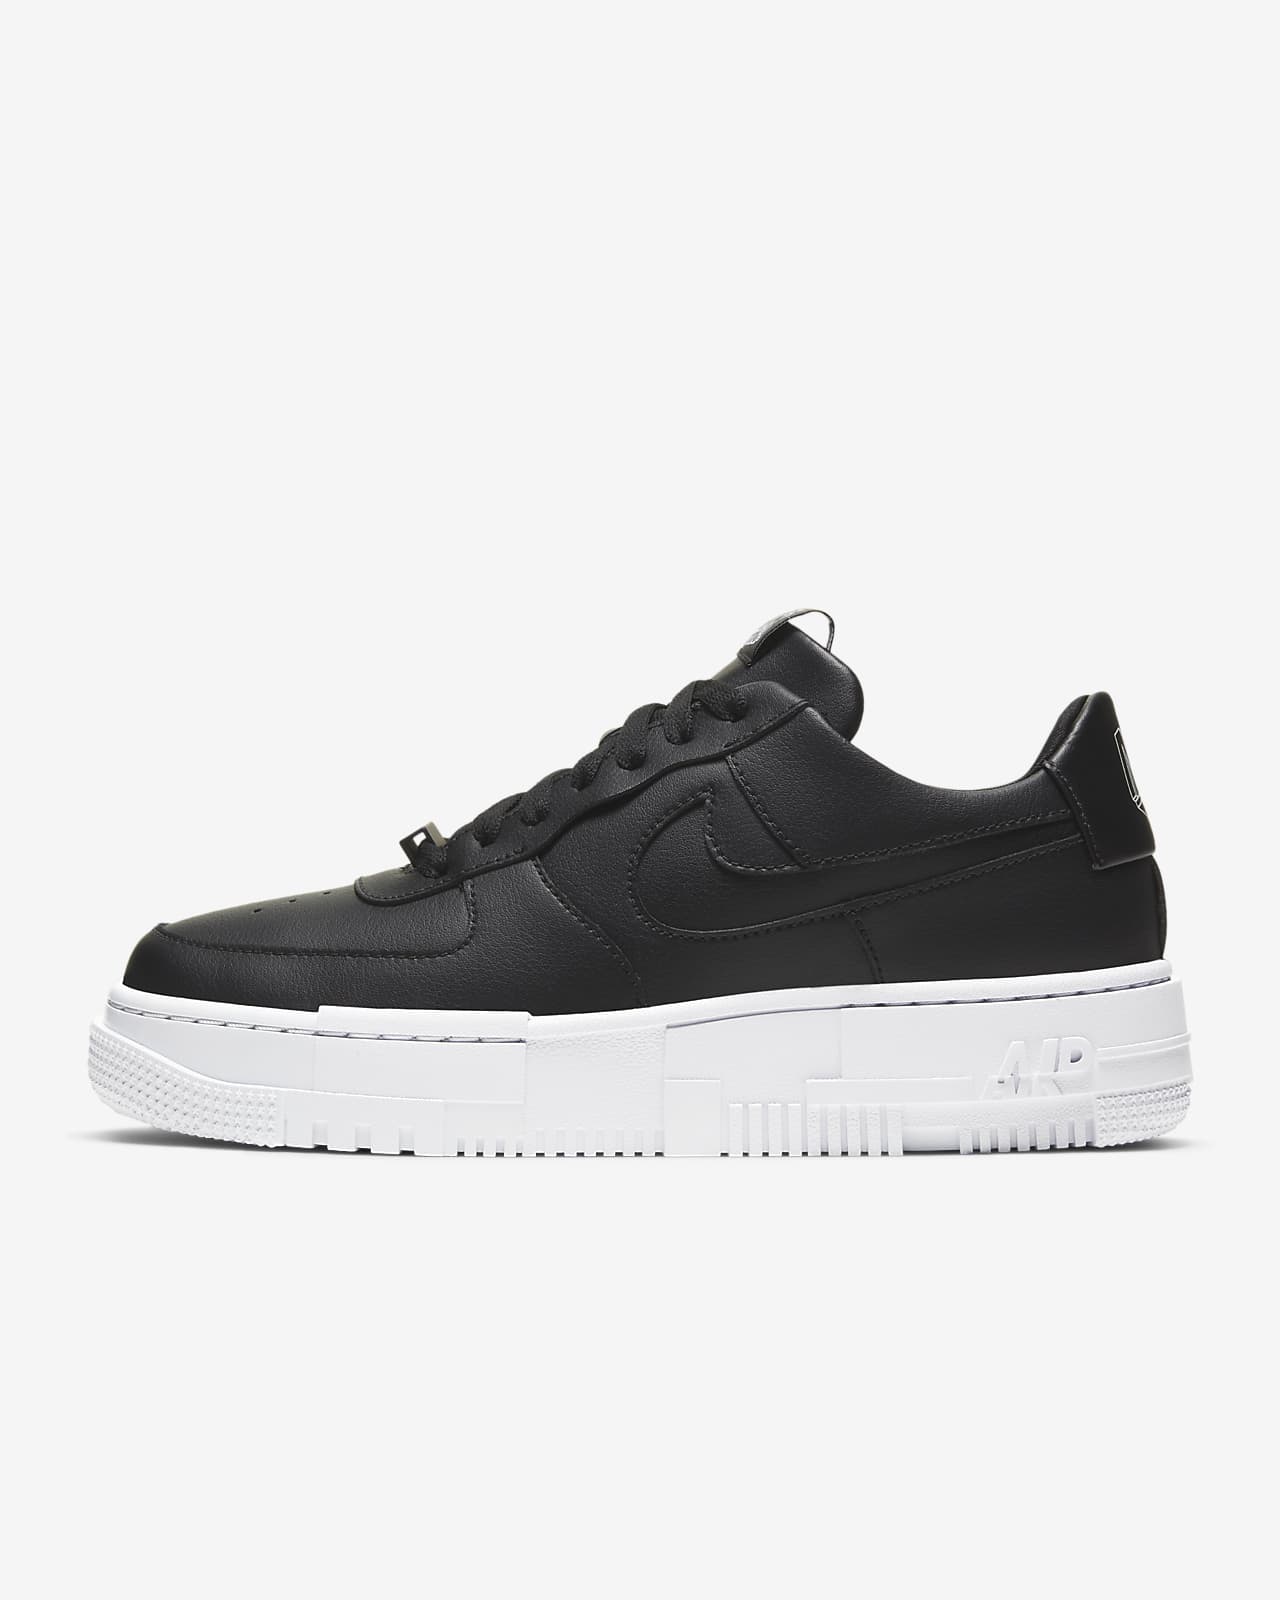 black and white air forces women's